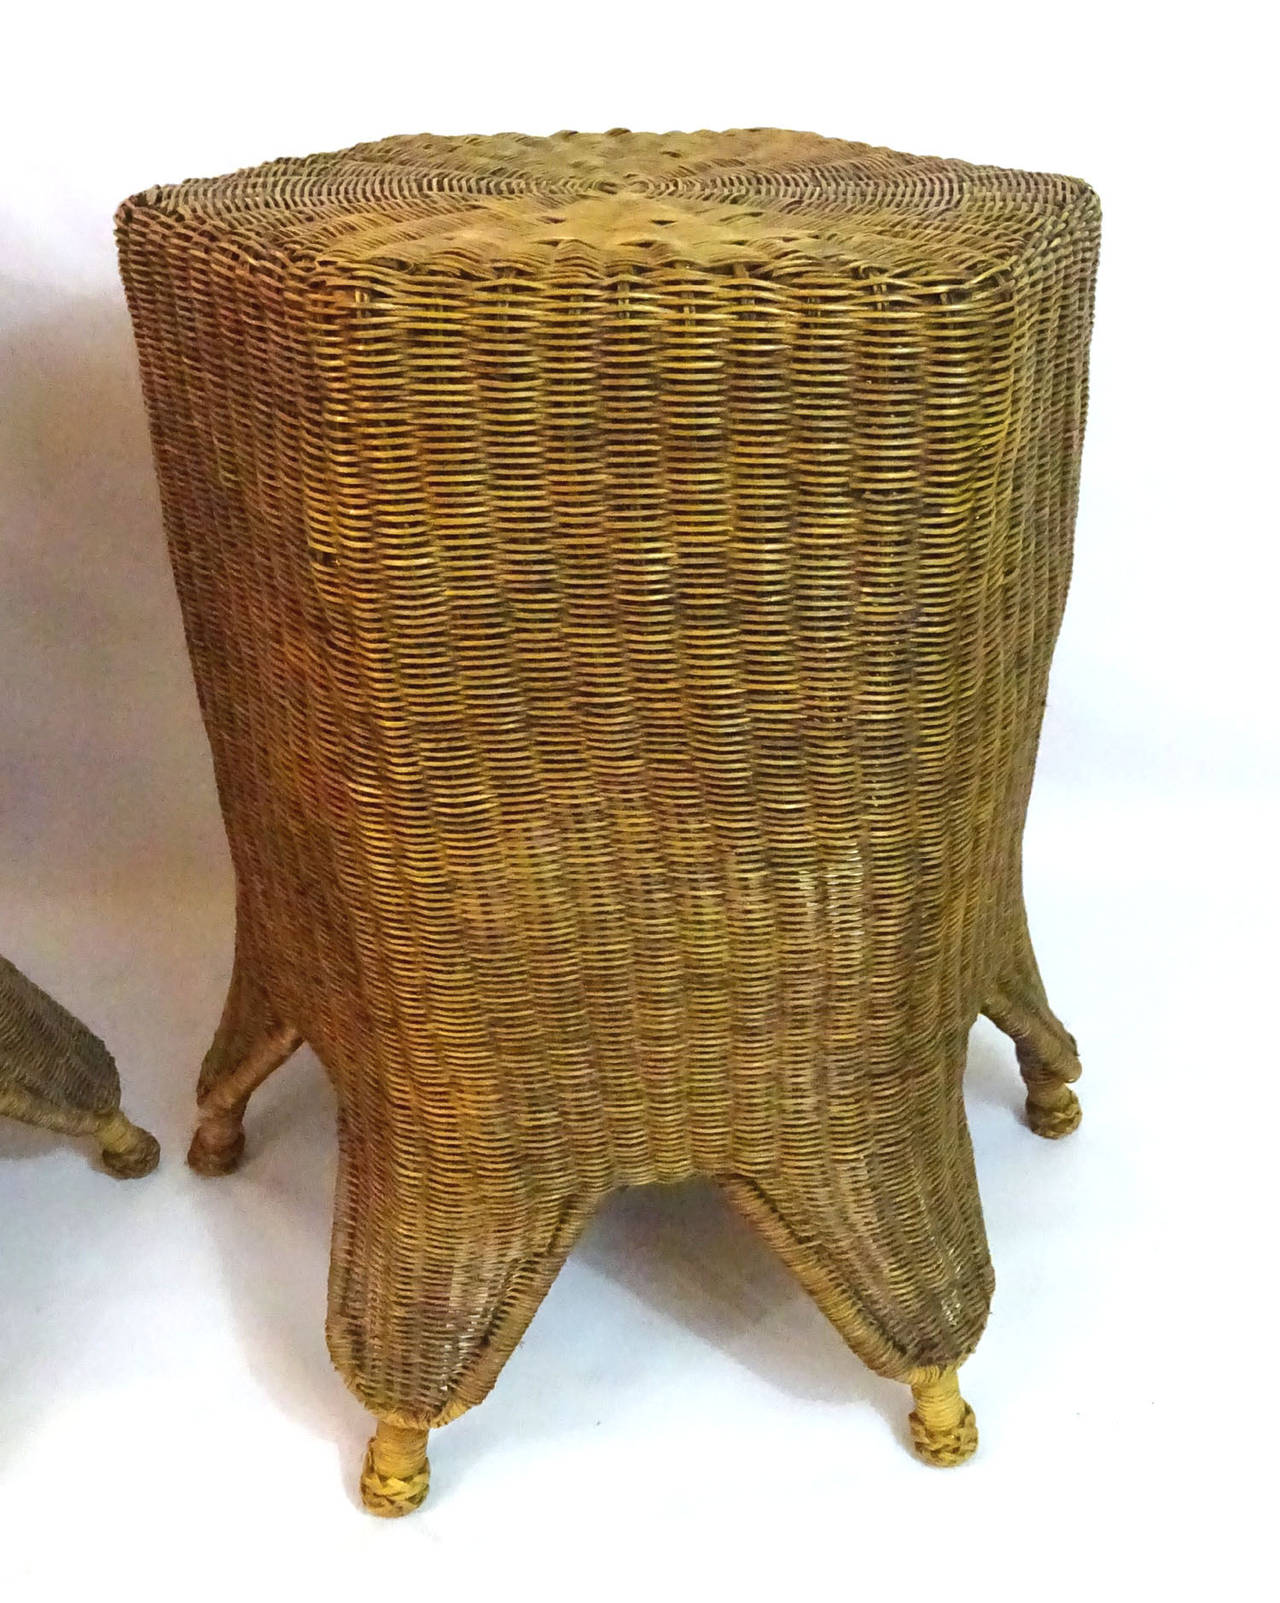 Pair of 20th Century Handwoven Wicker Hexagonal Side Tables In Good Condition For Sale In Dallas, TX